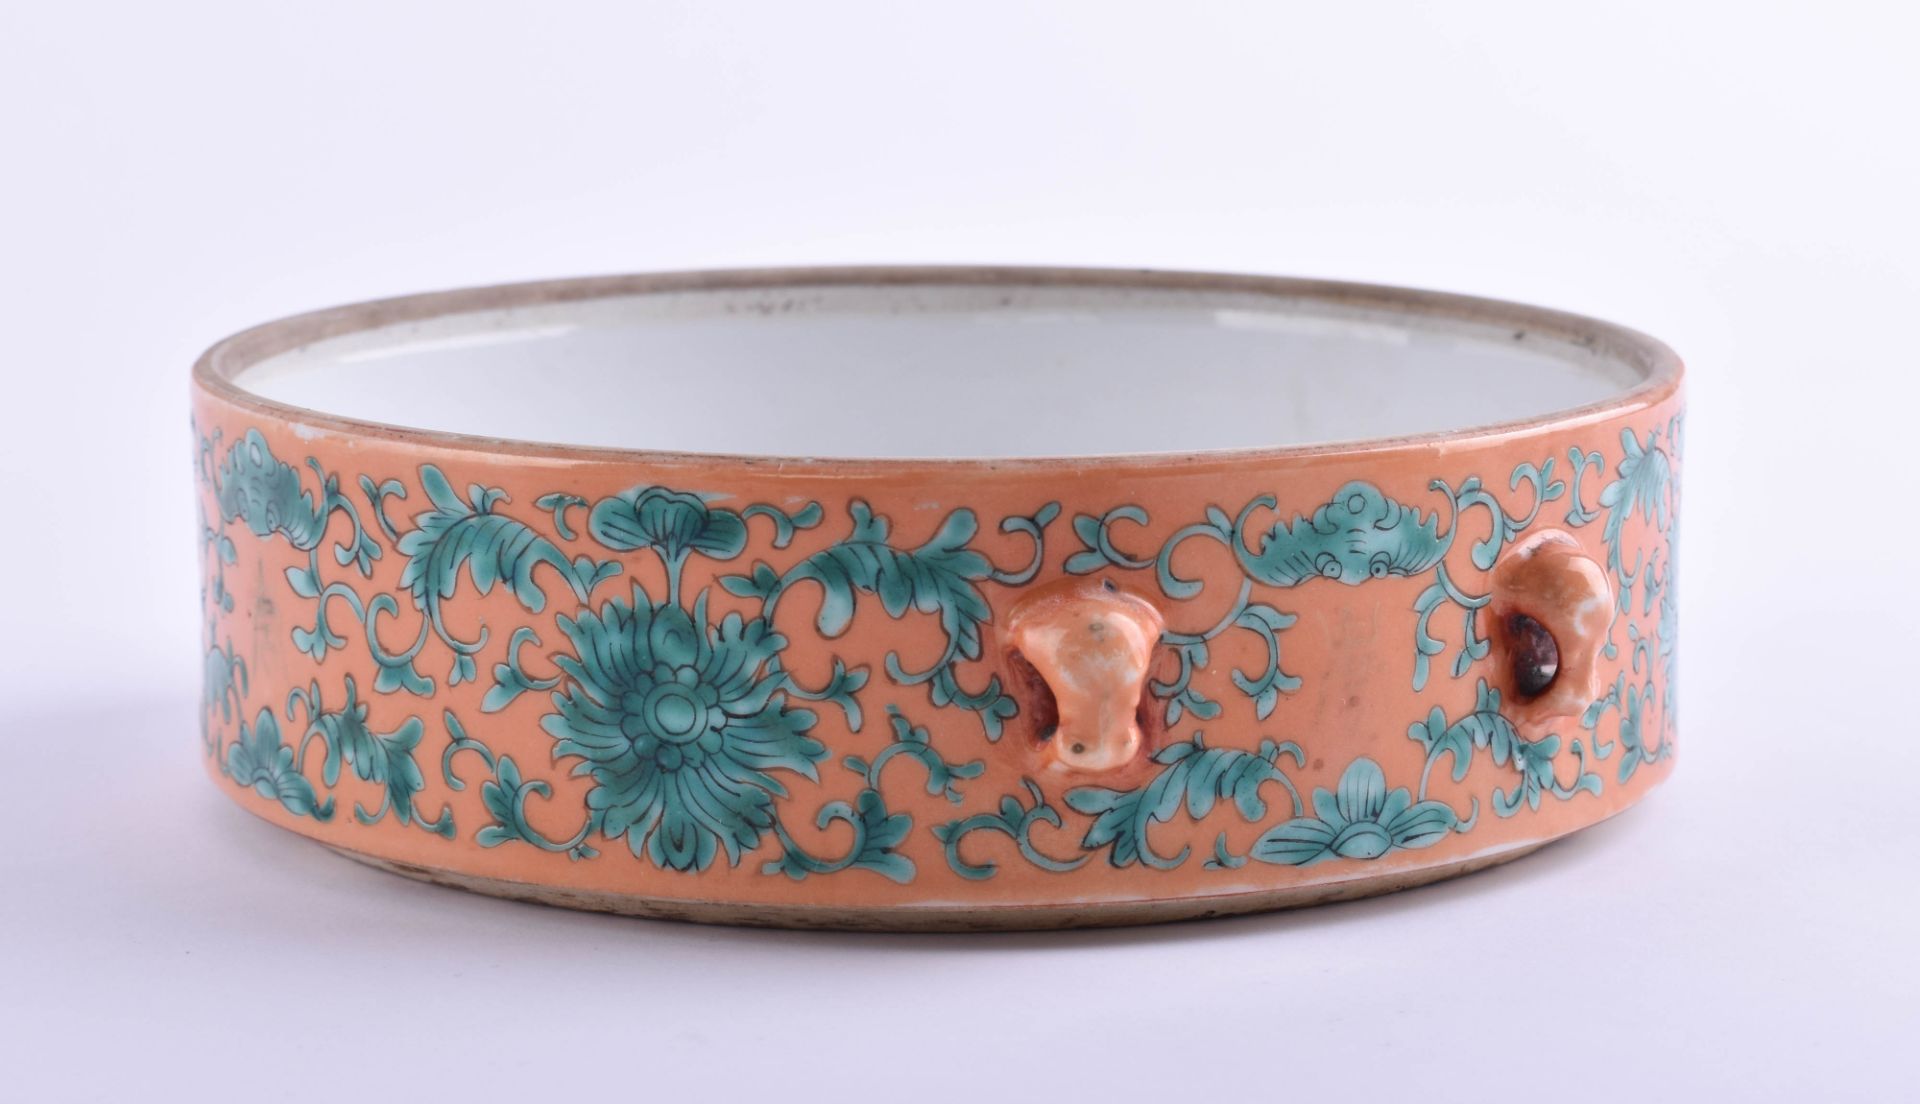  Famille Rose storage container China Qing dynasty - Image 2 of 6